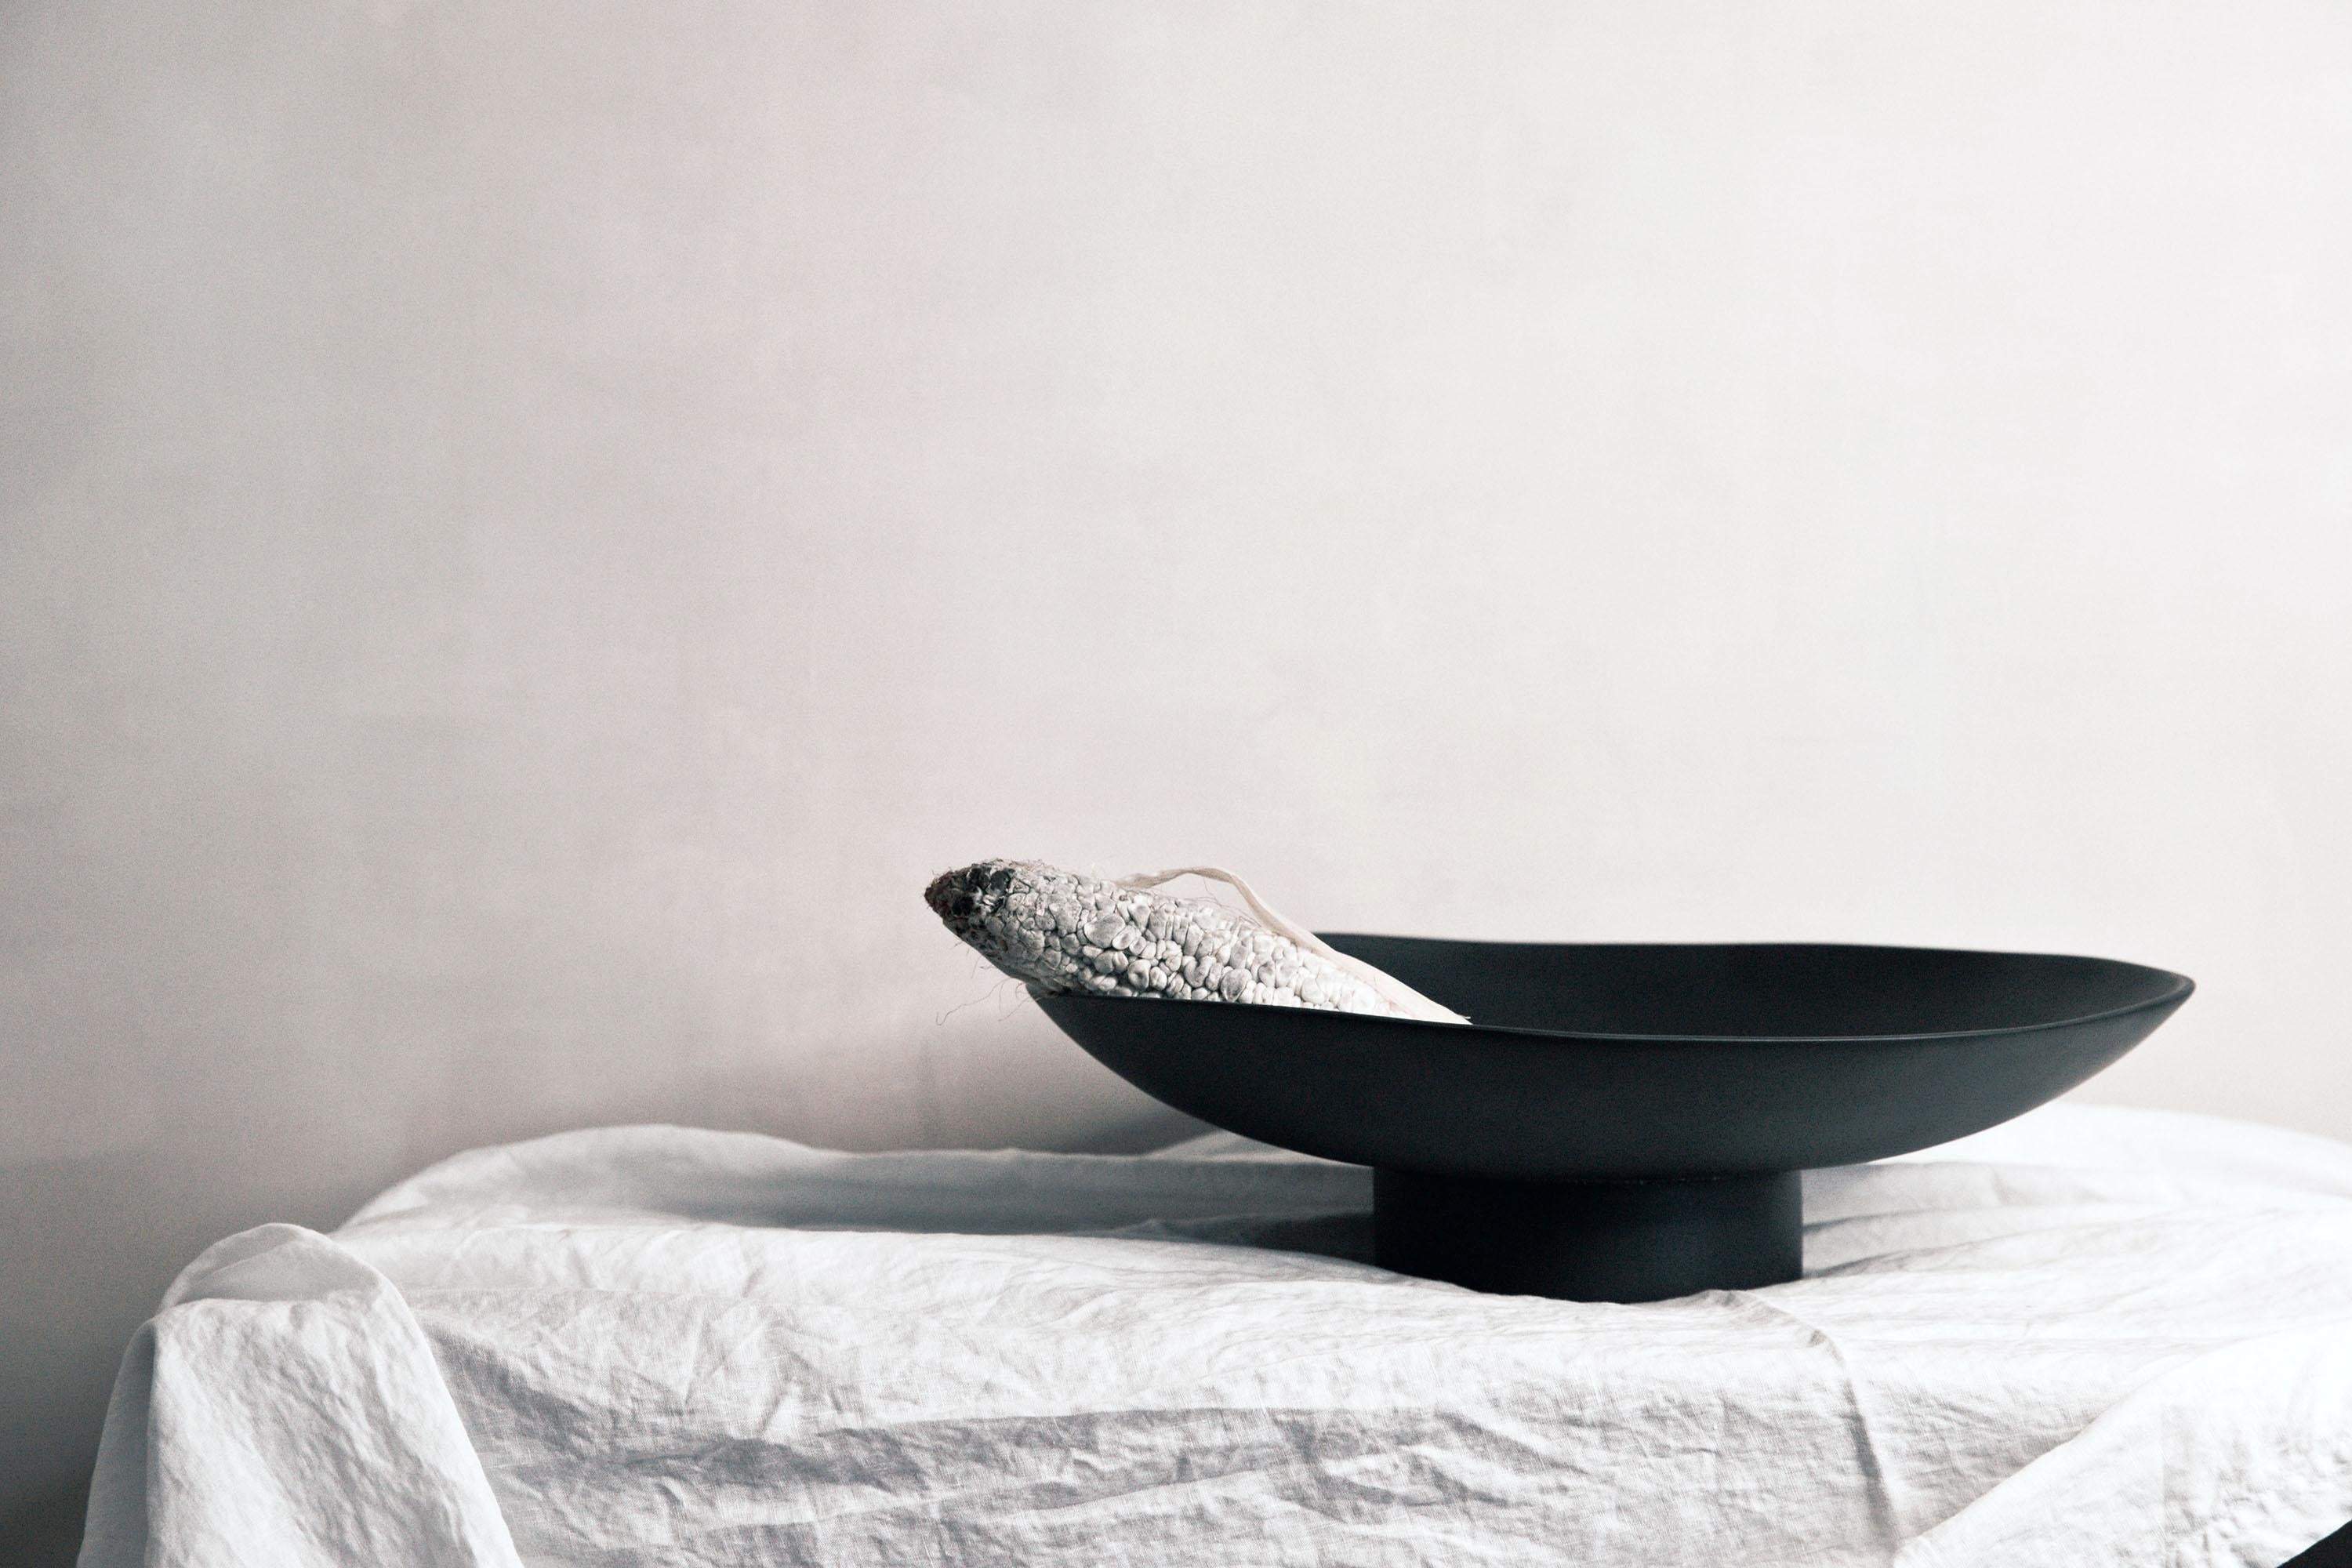 A striking resin bowl that makes a great centerpiece

This resin bowl comes in two variations: one is all black resin, and one is made from a mix of black and clear resin that blend together in swirls and clouds reminiscent of ink dissolving in